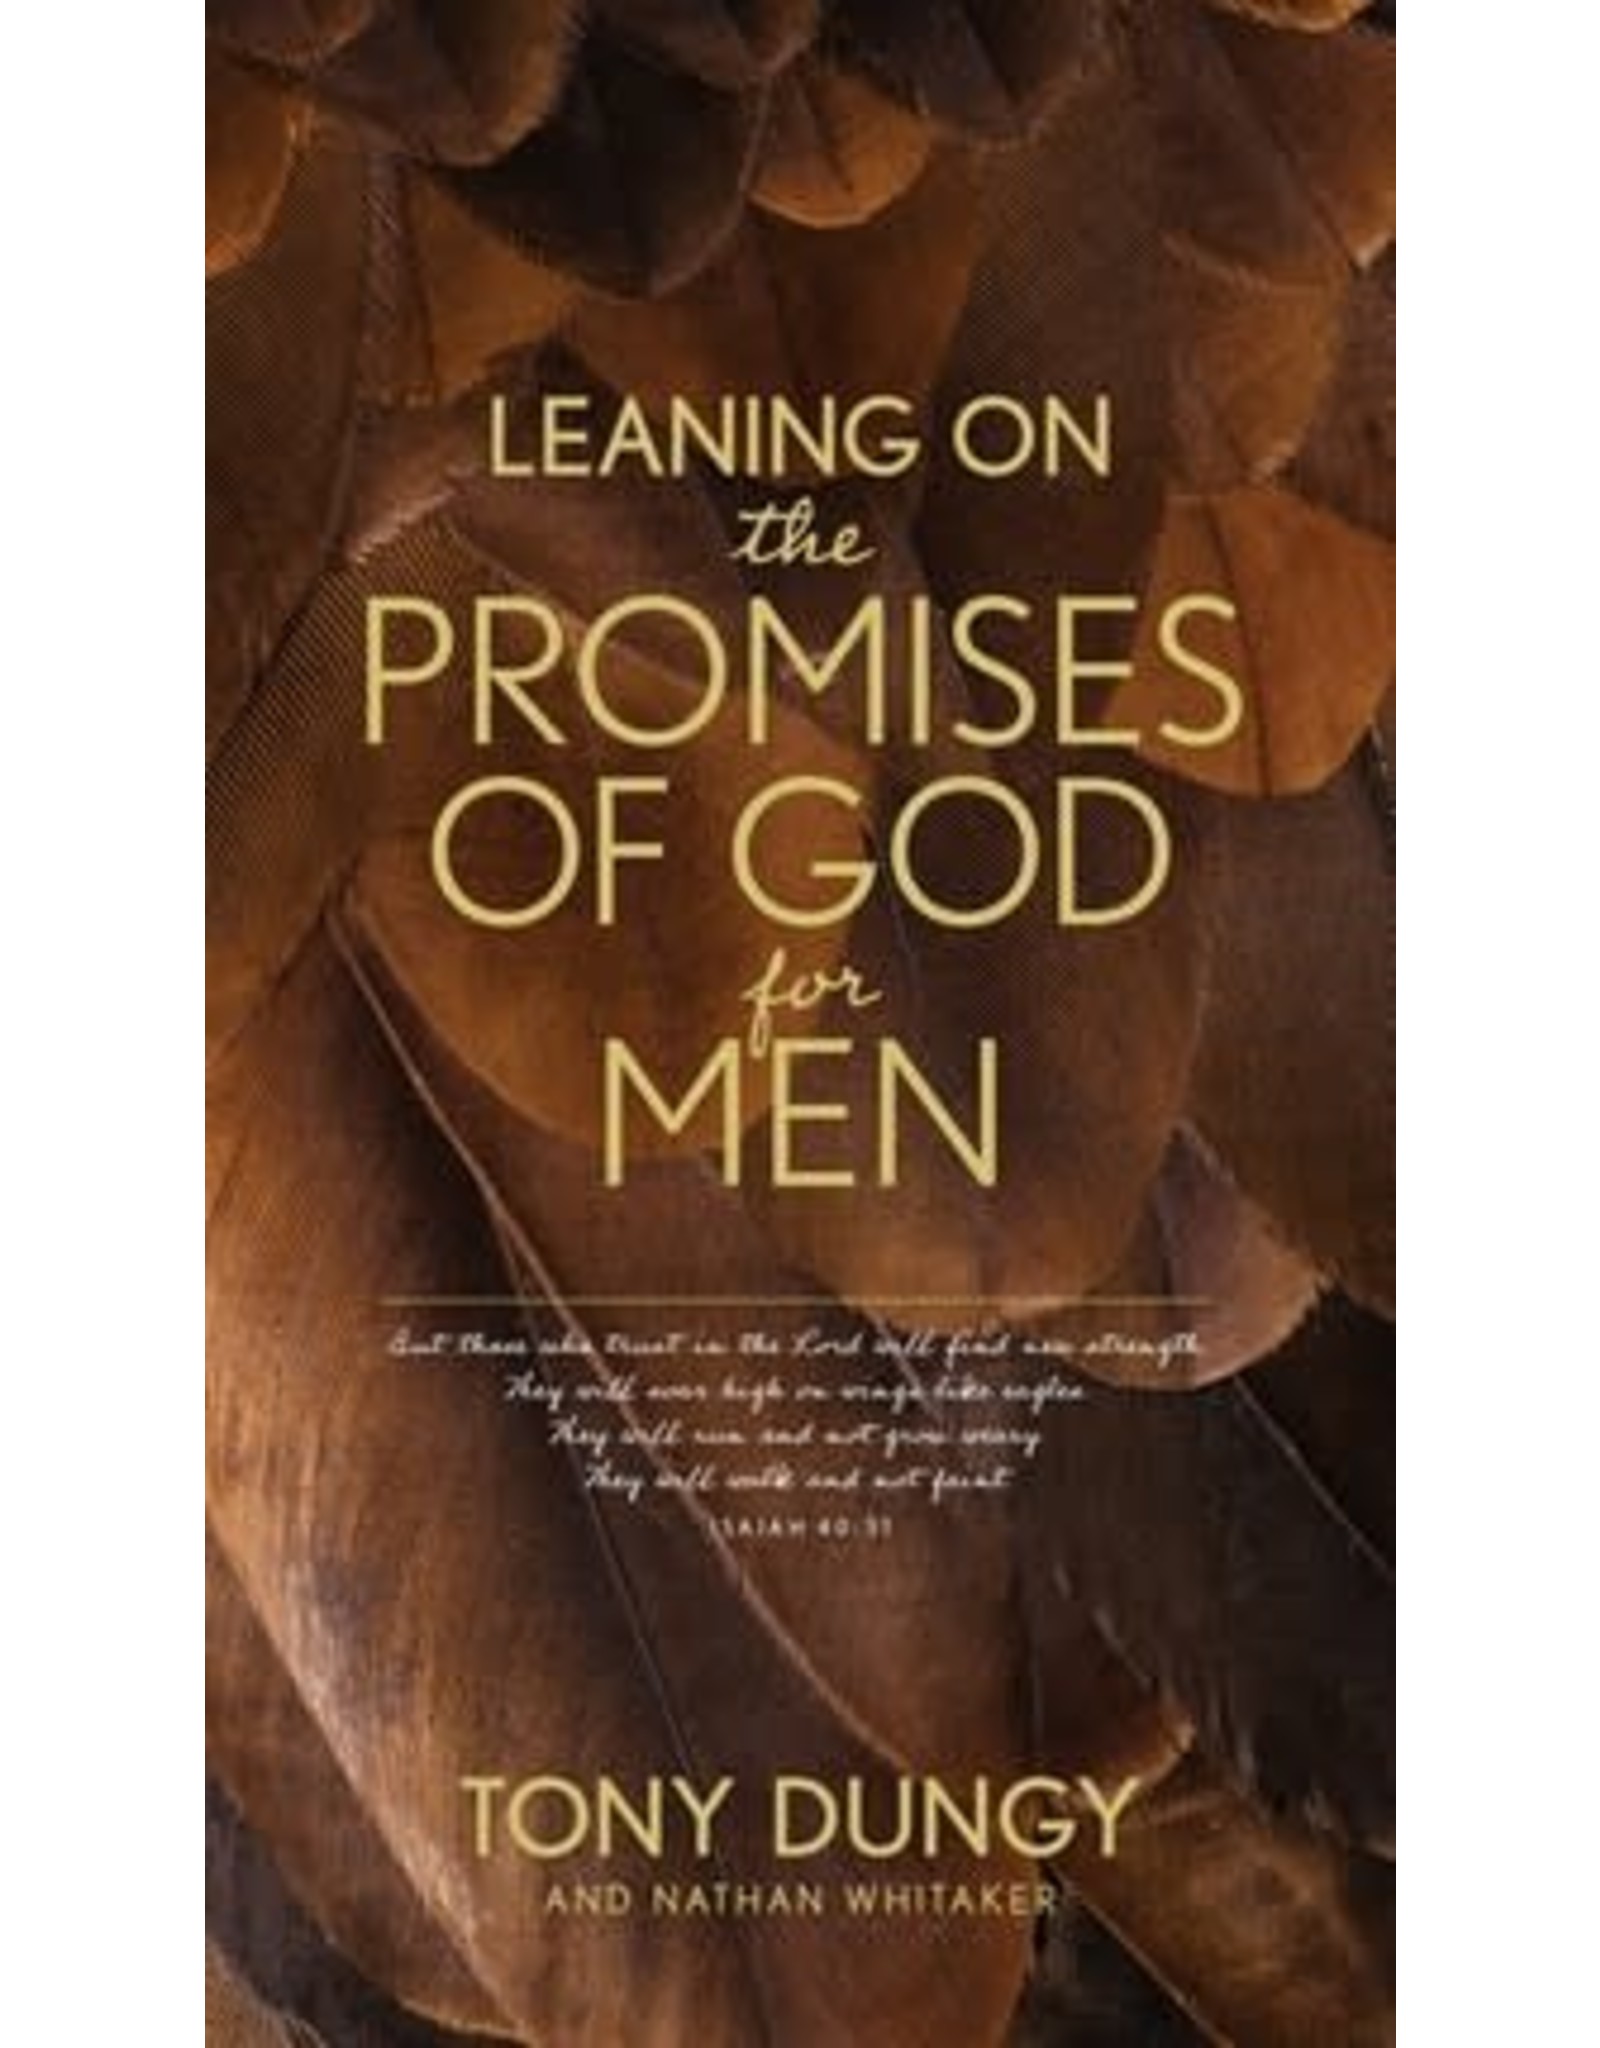 Leaning on the Promises of God for Men by Tony Dungy and Nathan Whitaker (Paperback)